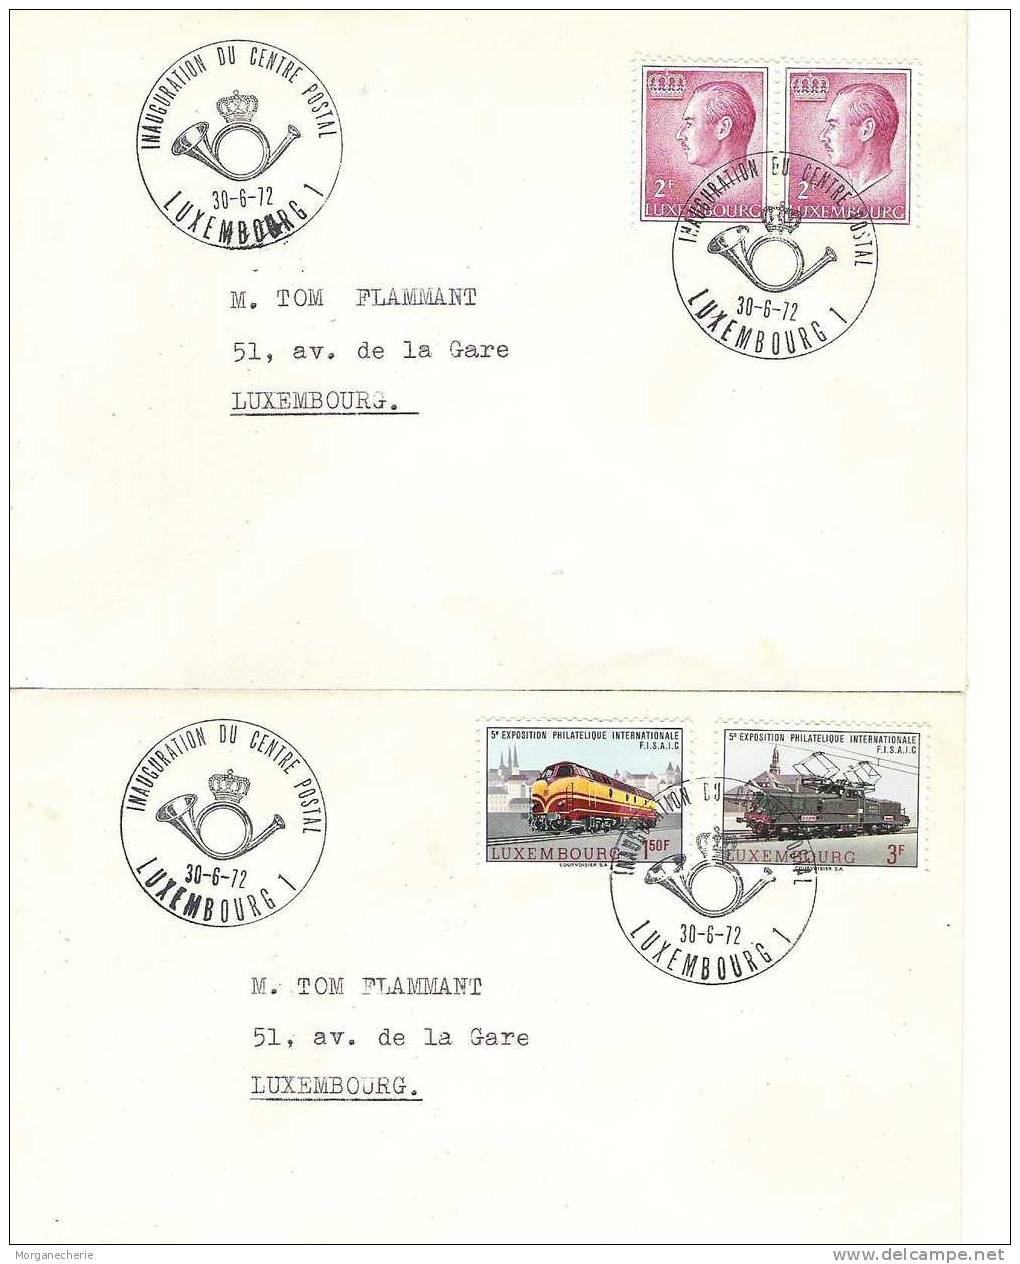 LUXEMBOURG,  1972 CENTRE POSTAL - Commemoration Cards